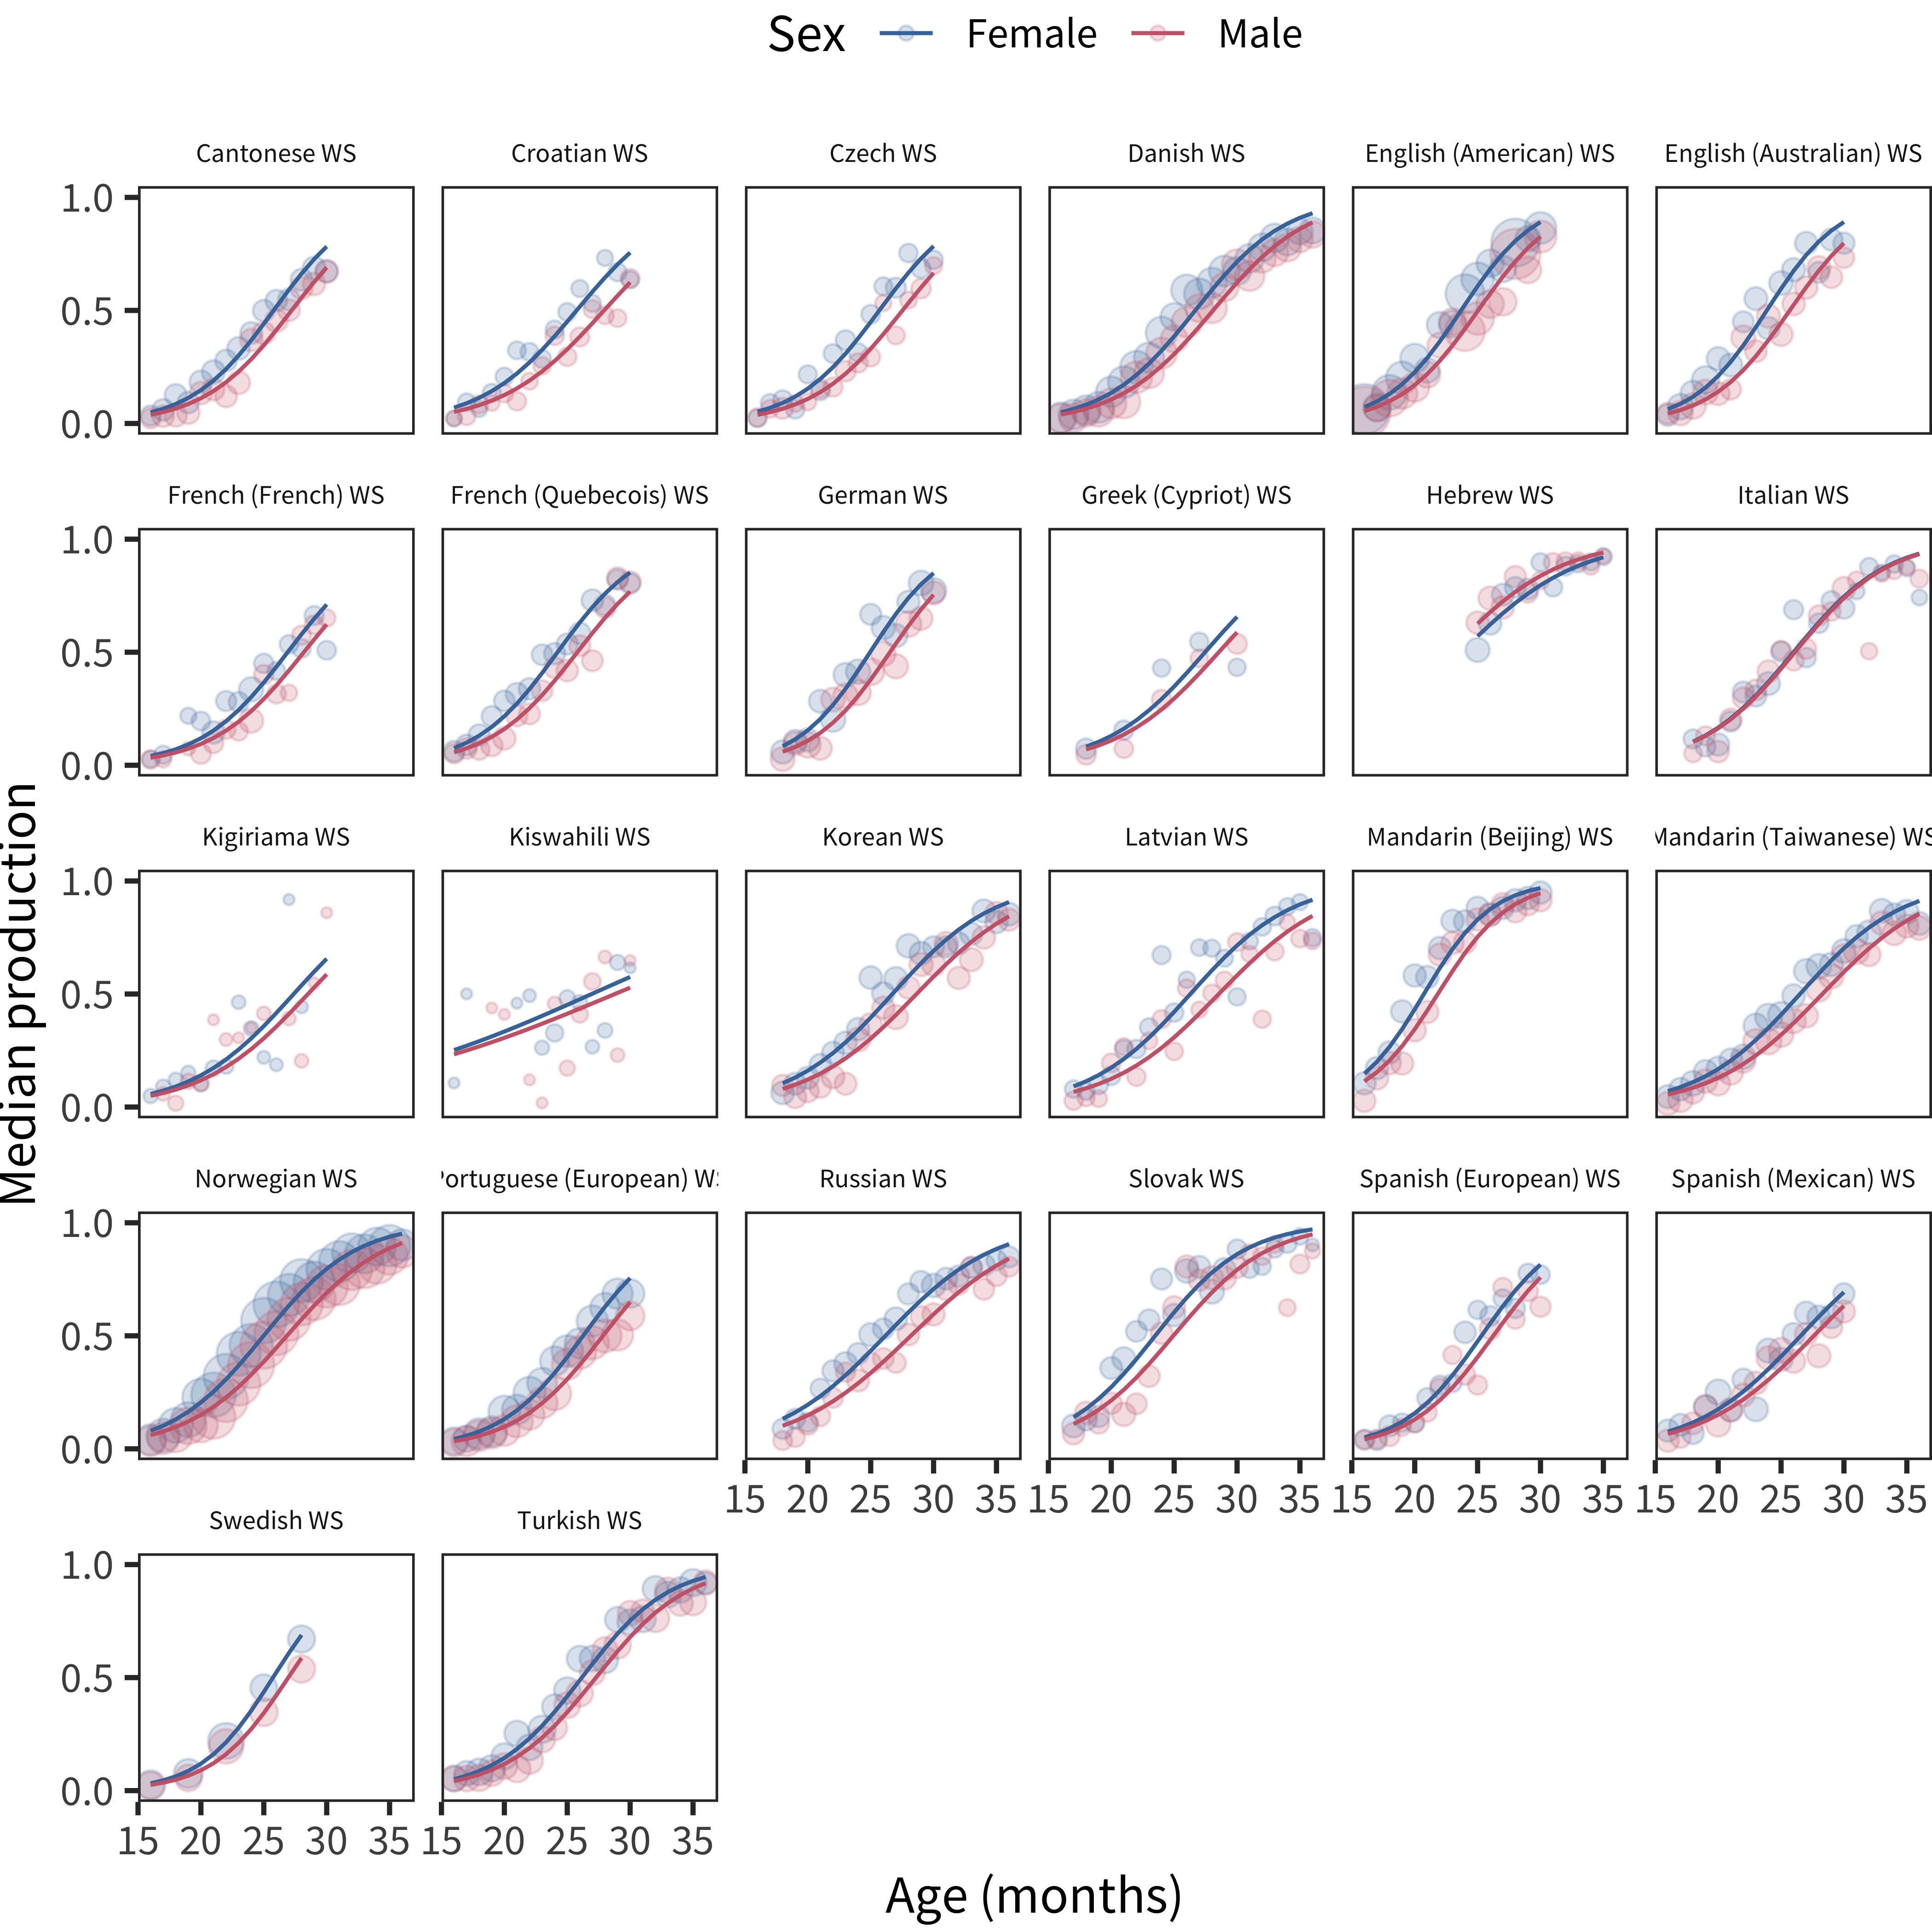 Differences in WS production scores by sex, plotted across age by language.